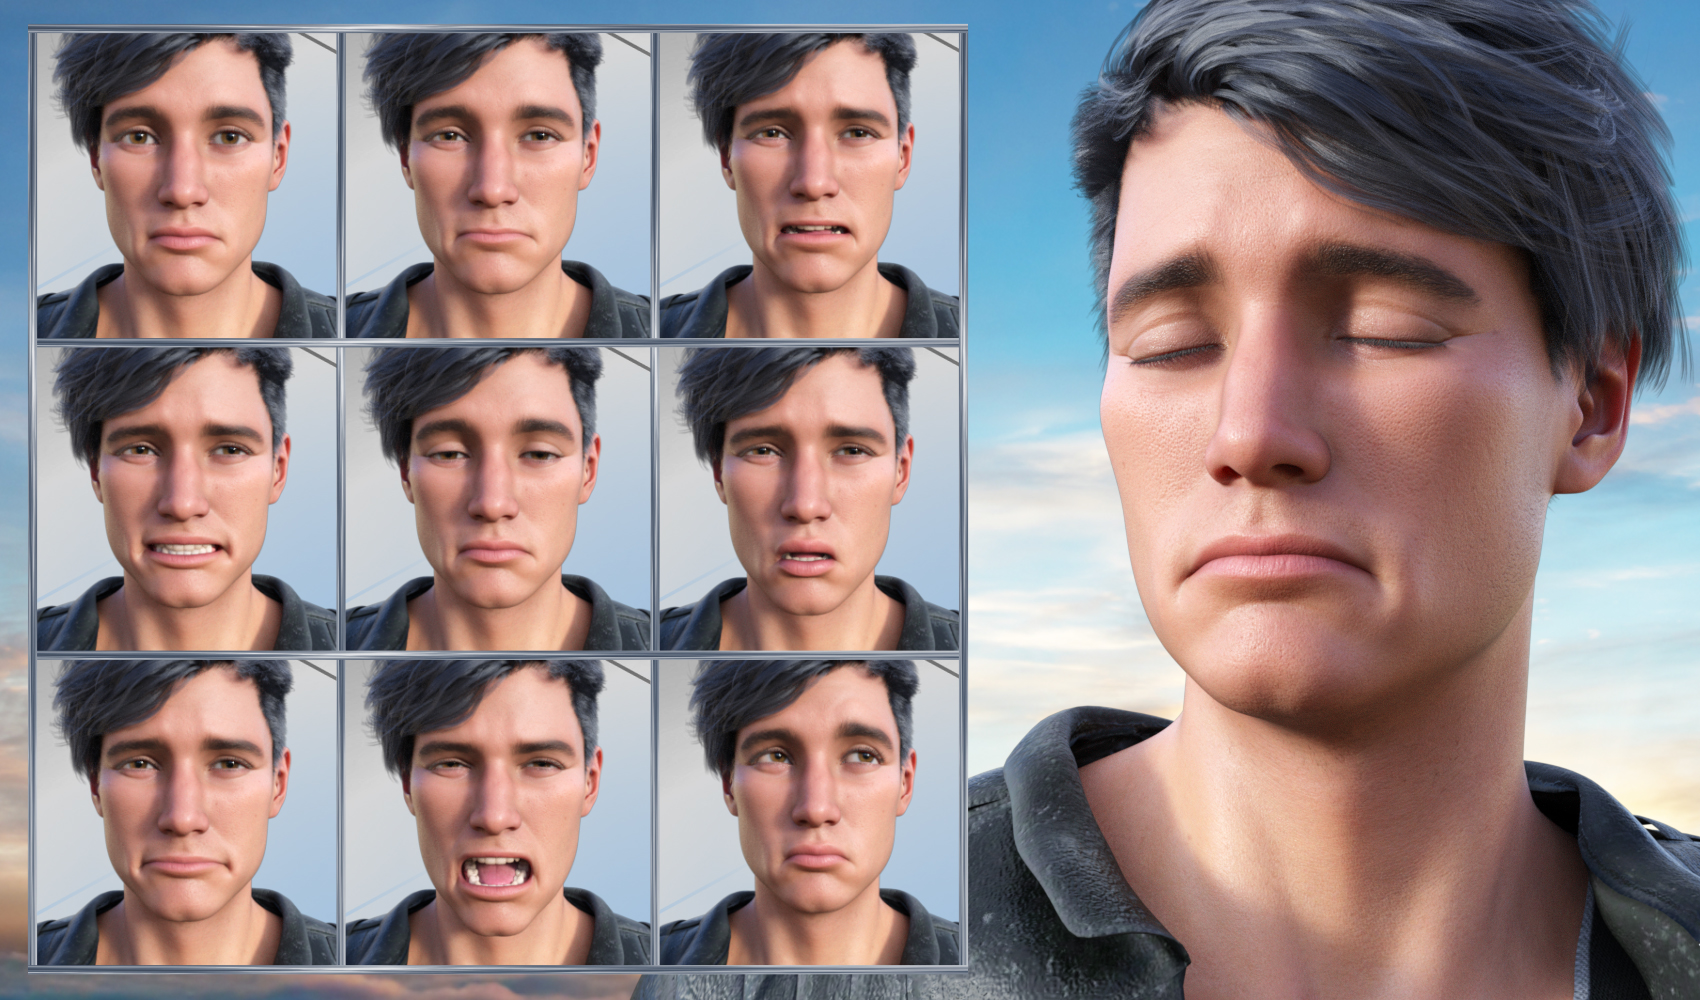 New Faces Expressions for Genesis 8.1 Male and Michael 8.1 by: JWolf, 3D Models by Daz 3D